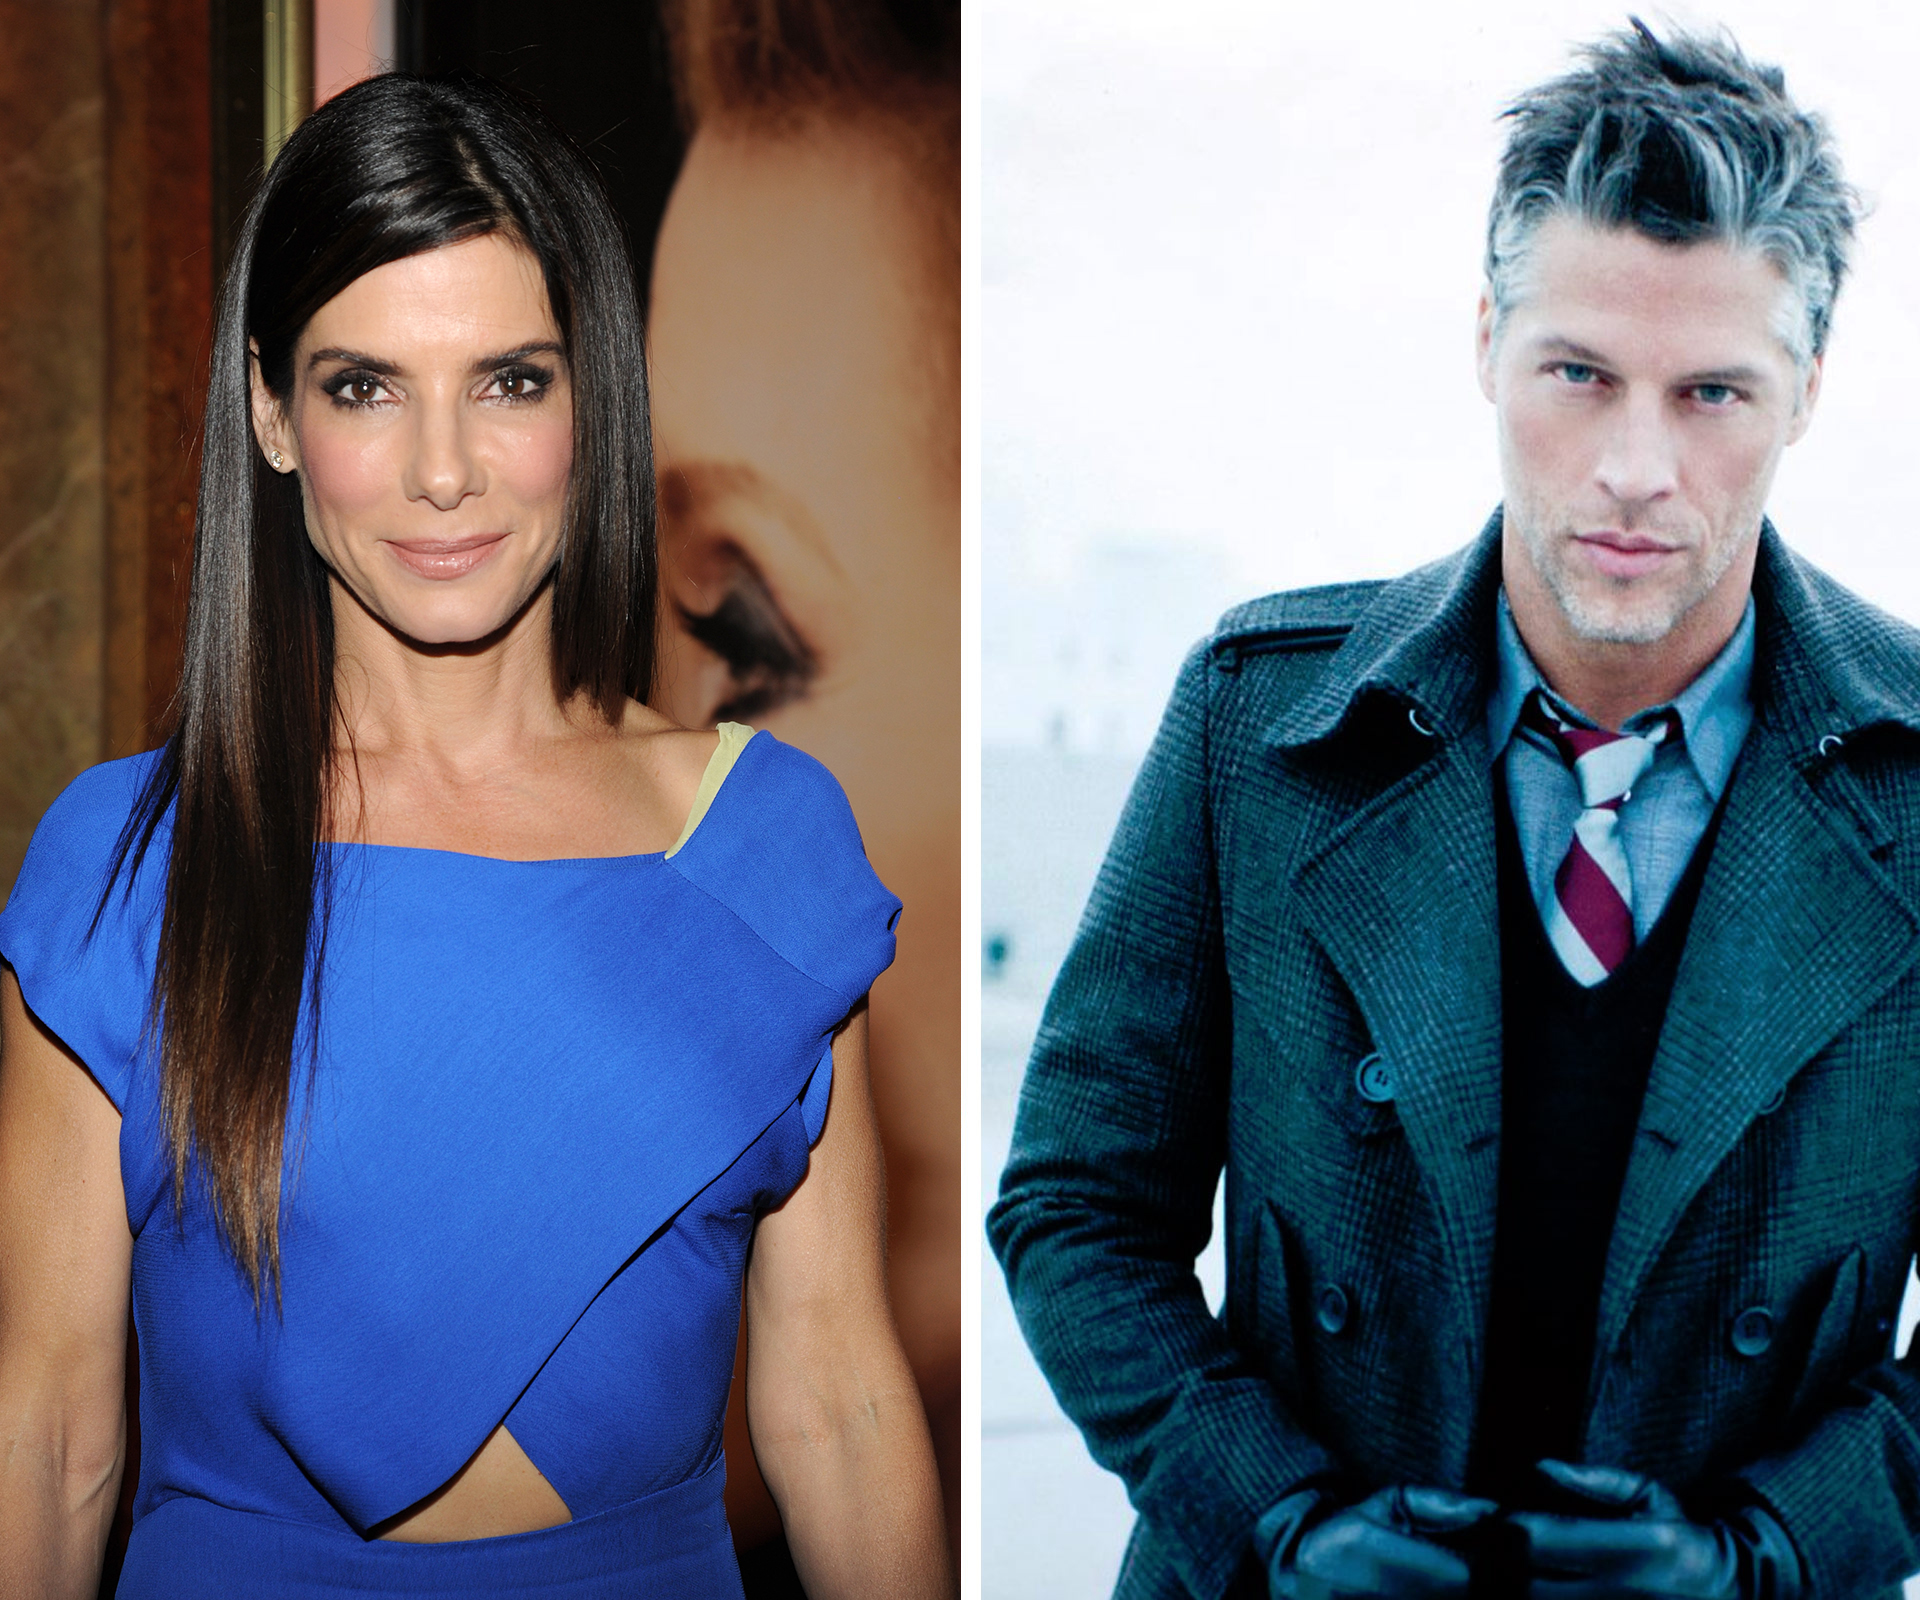 Happiness after heartbreak! Is Sandra Bullock adopting a baby girl with new man, Bryan Randall?